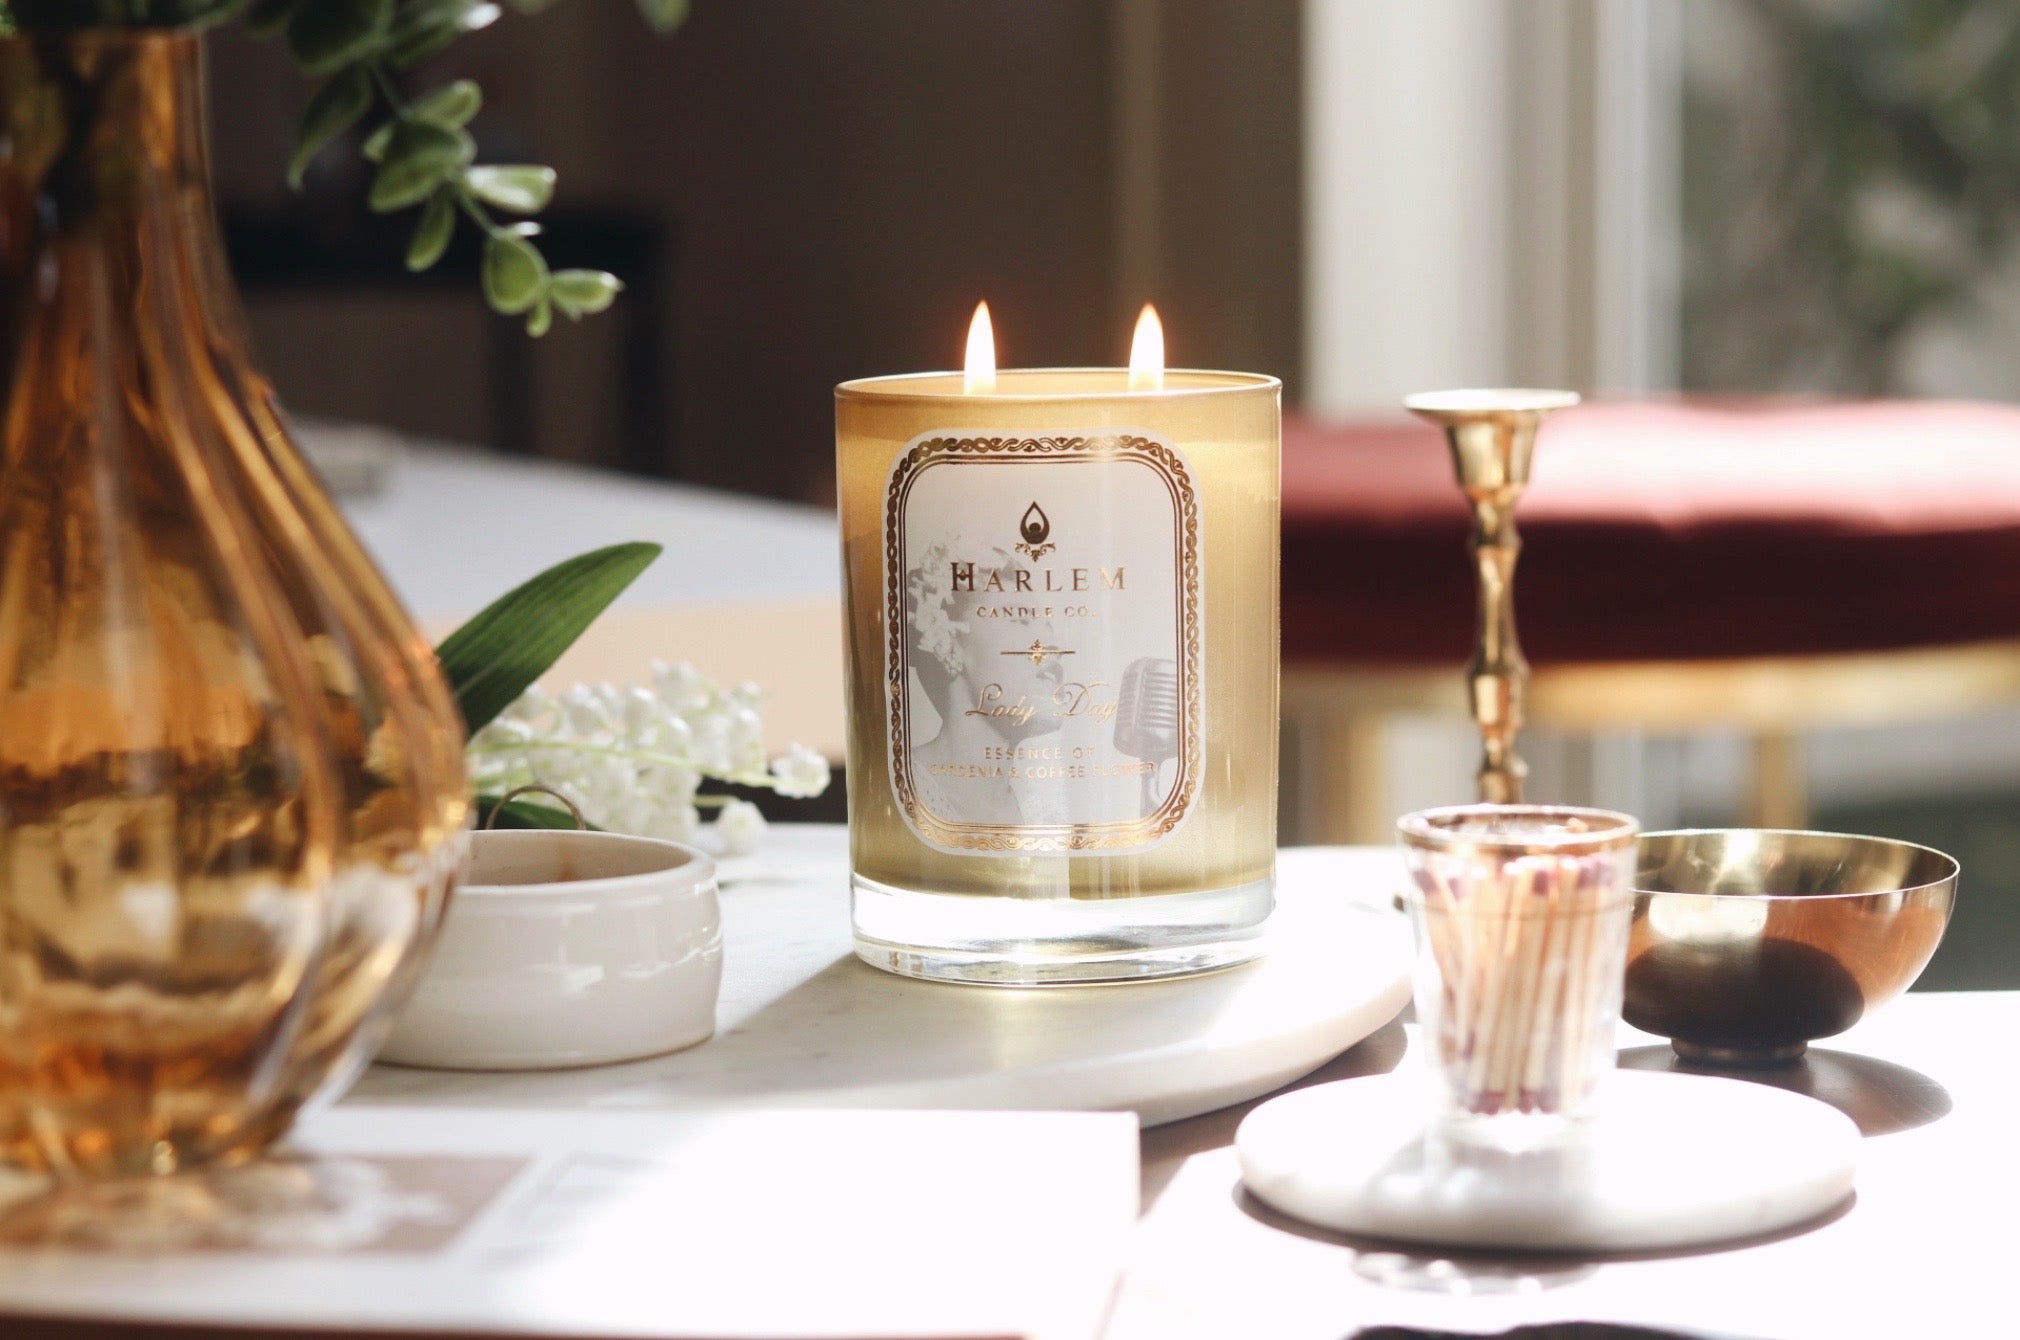 Lifestyle image of the Lady Day candle on a beautiful table with flowers.